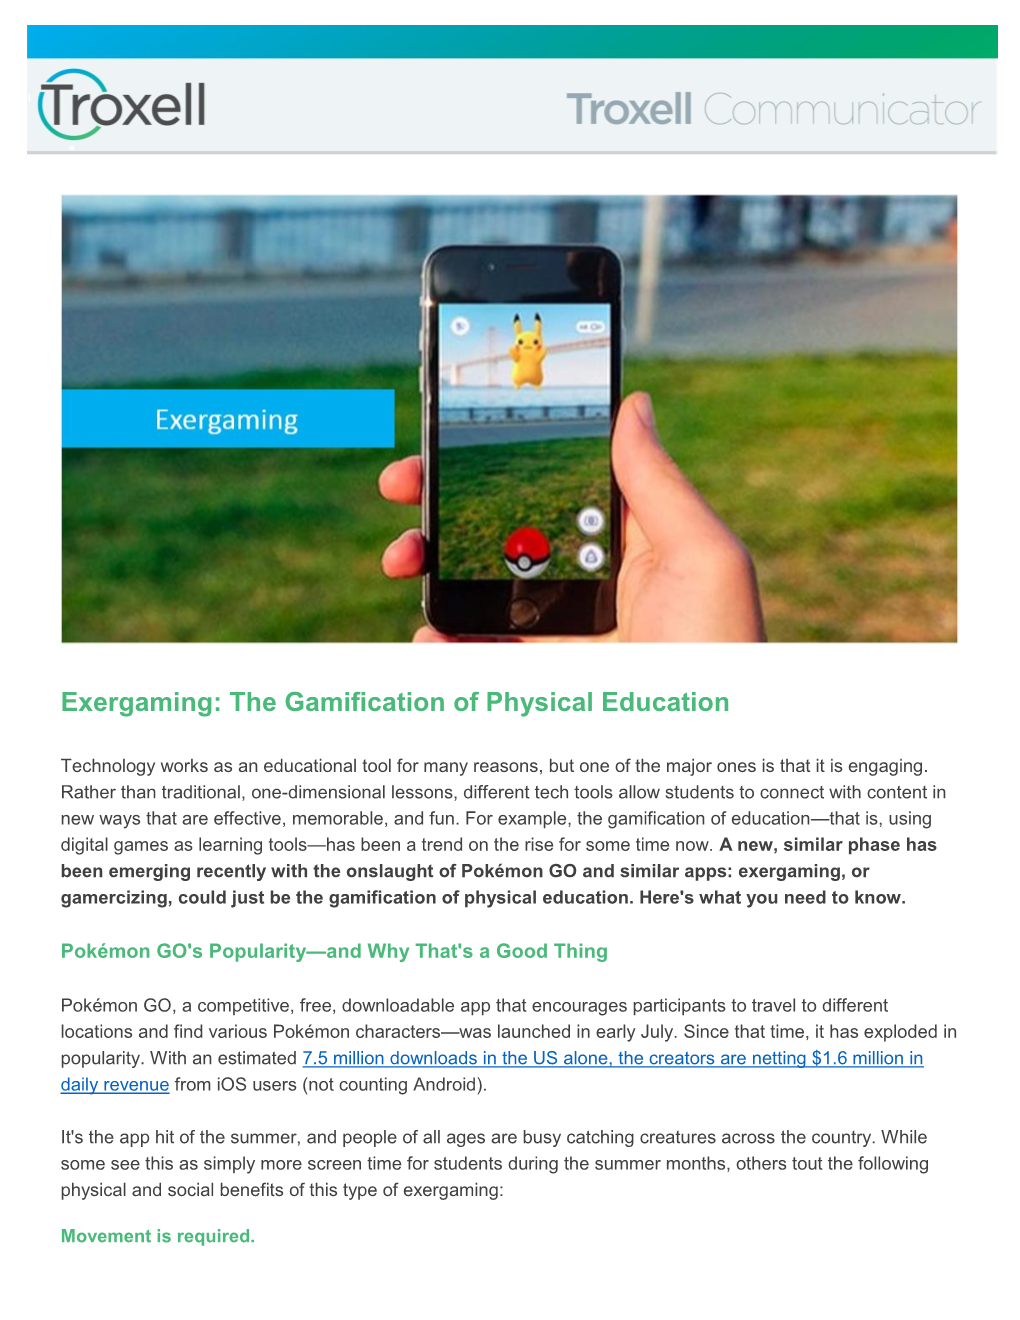 Exergaming: the Gamification of Physical Education